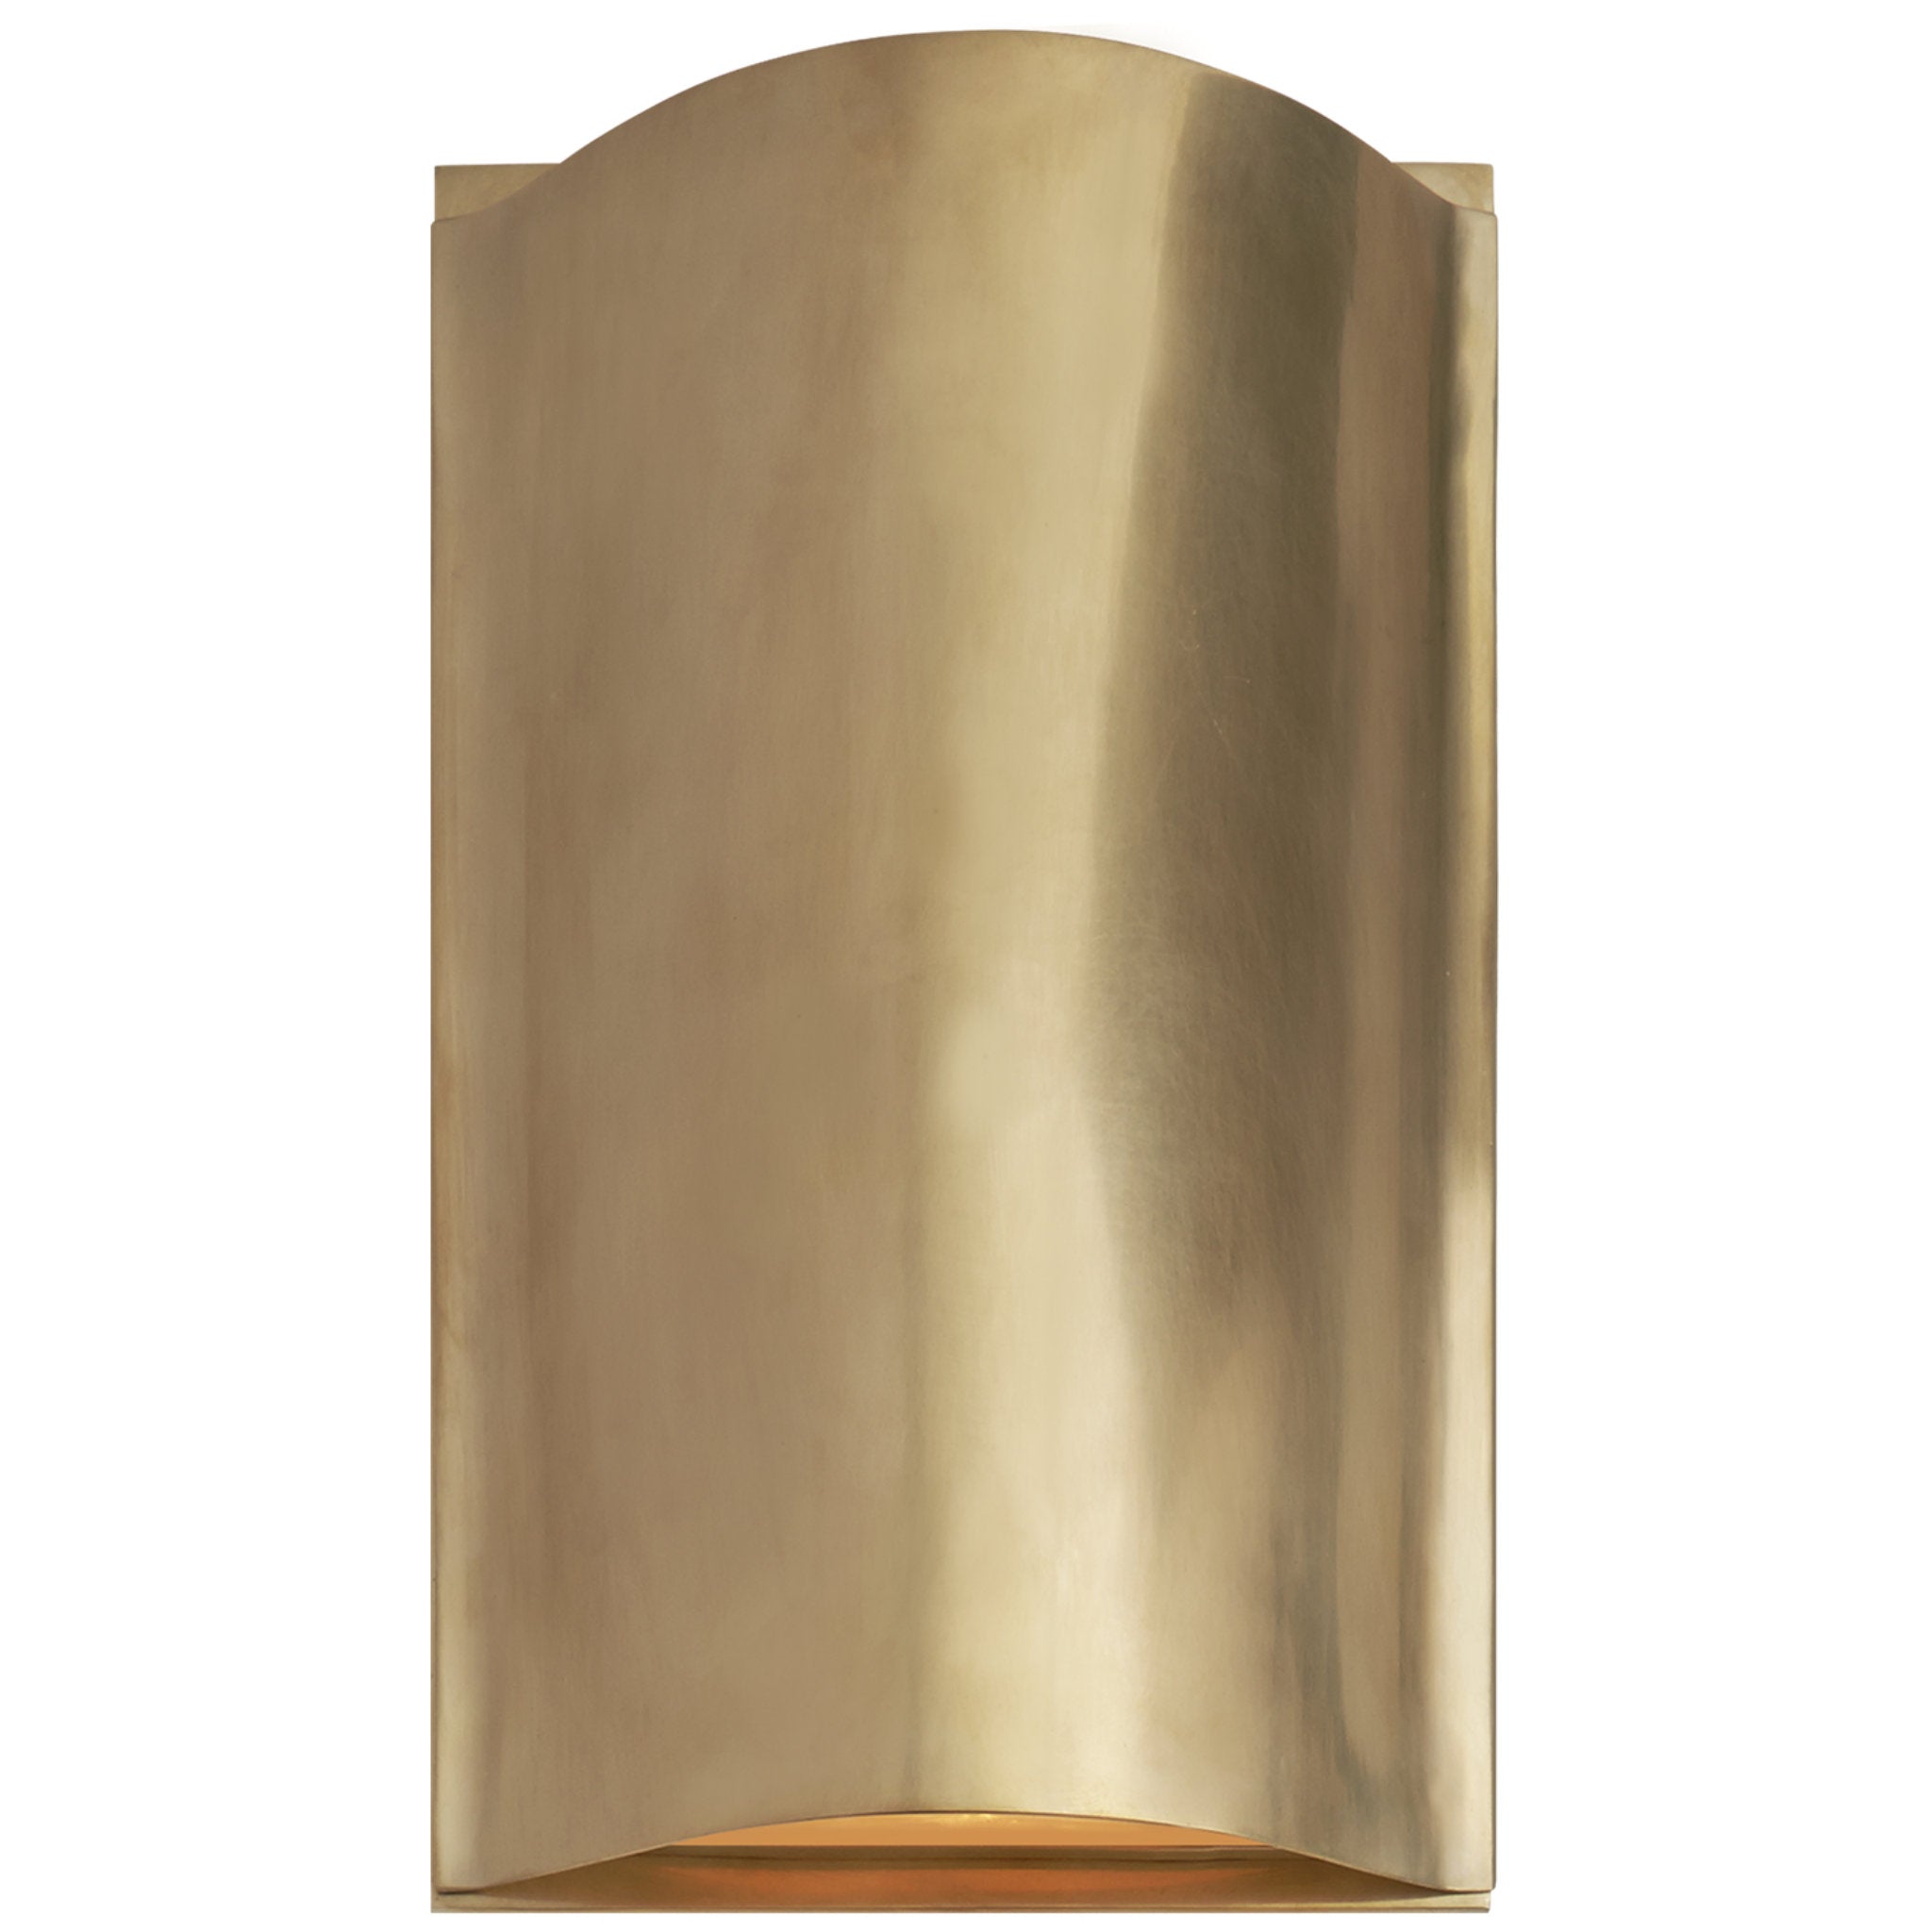 Kelly Wearstler Avant Small Curve Sconce in Antique-Burnished Brass with Frosted Glass